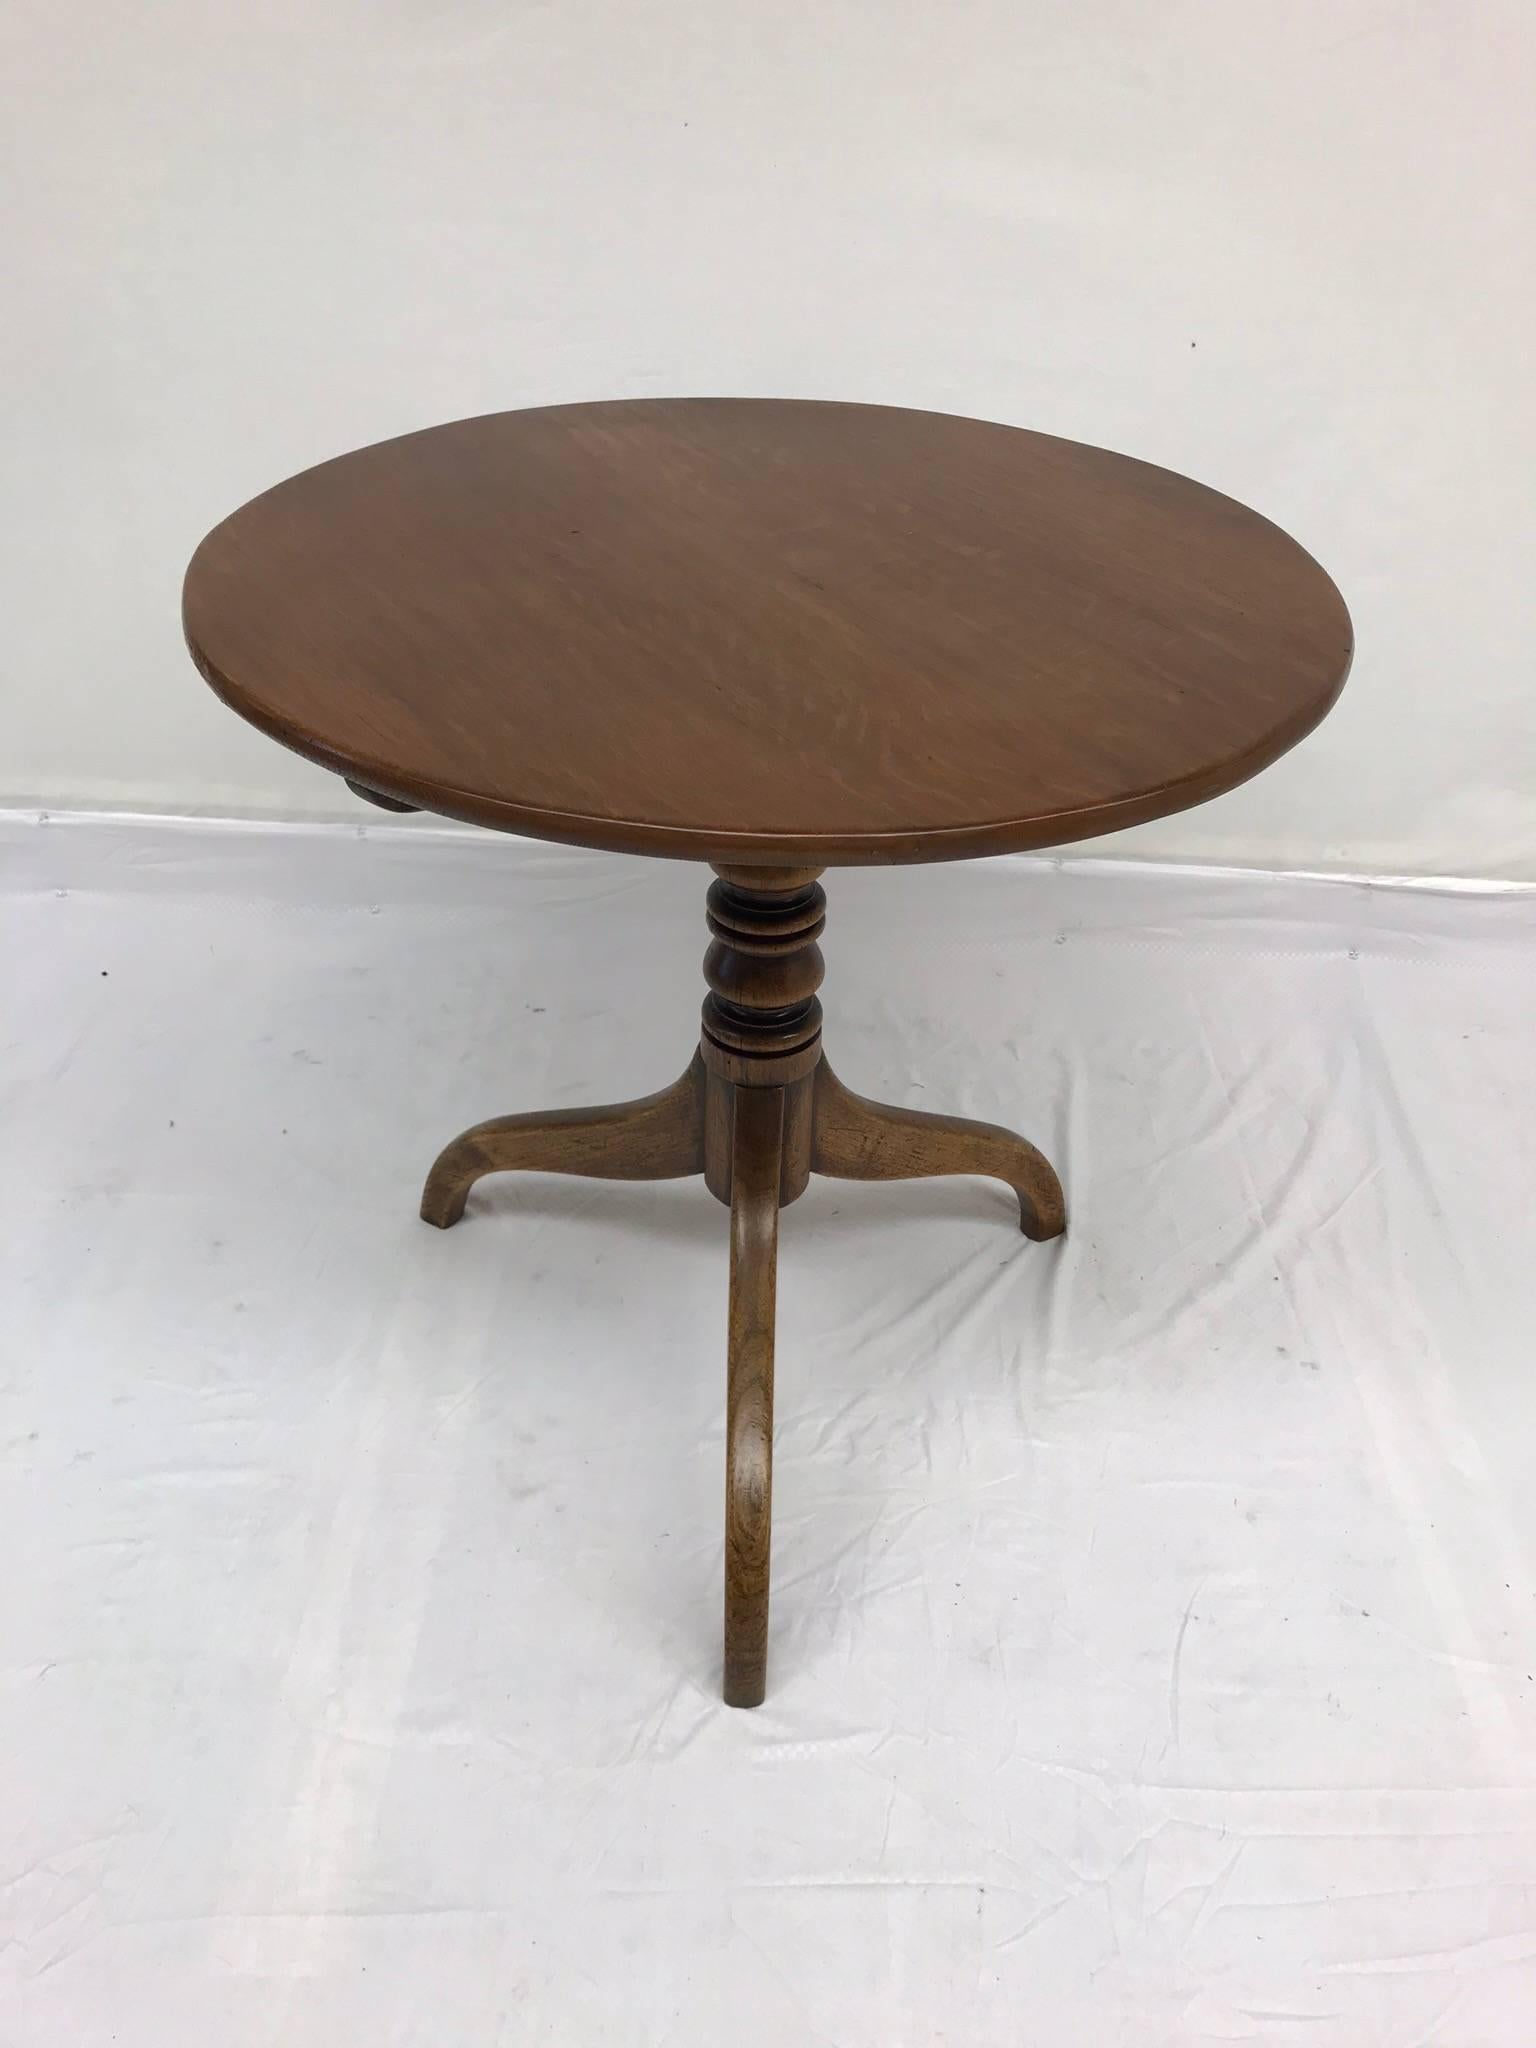 A charming 18th century Georgian round wood pedestal table with tripod legs and turned base. Place this next to a sofa and pile high with books and a great table lamp. Top flips vertically to place table flush against a wall. Hook under table to